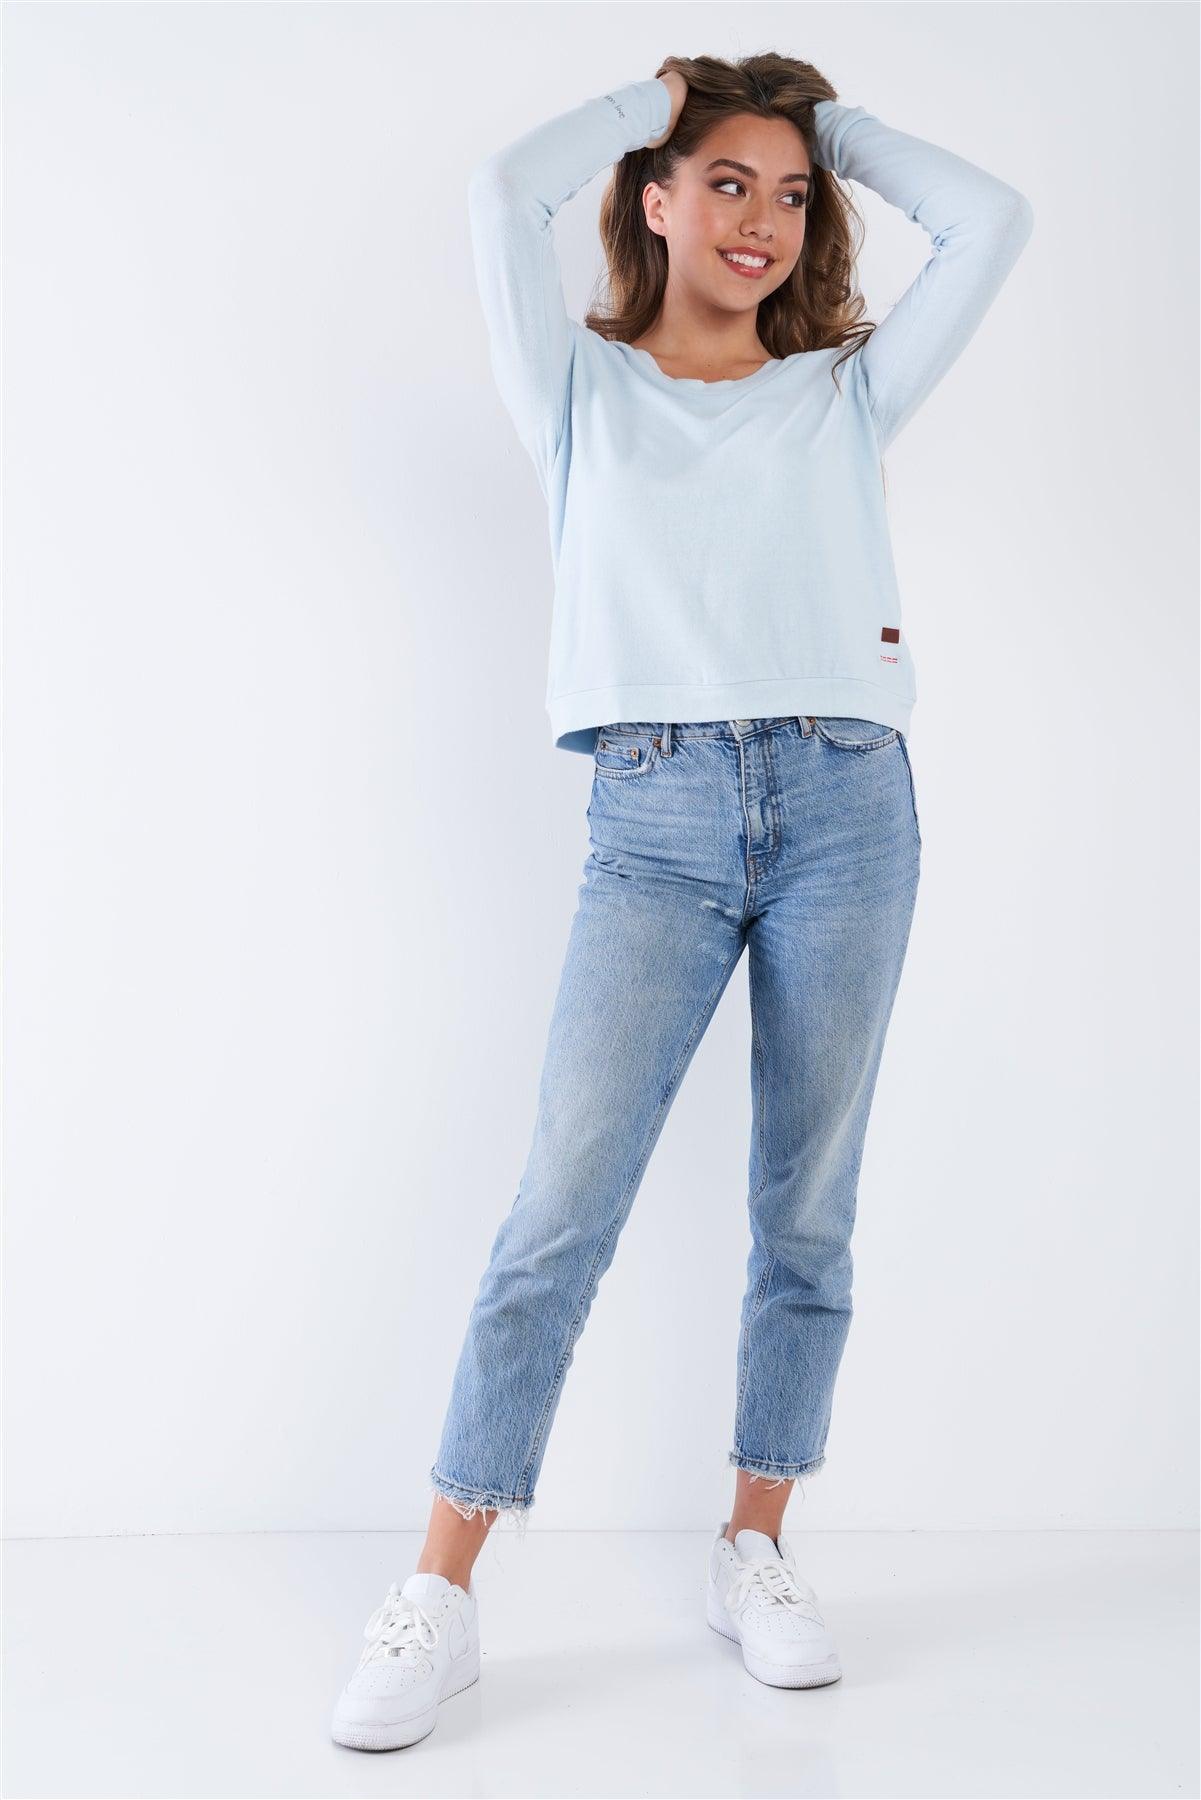 Baby Blue Long Sleeve Scoop Neck Lace Up Back Top